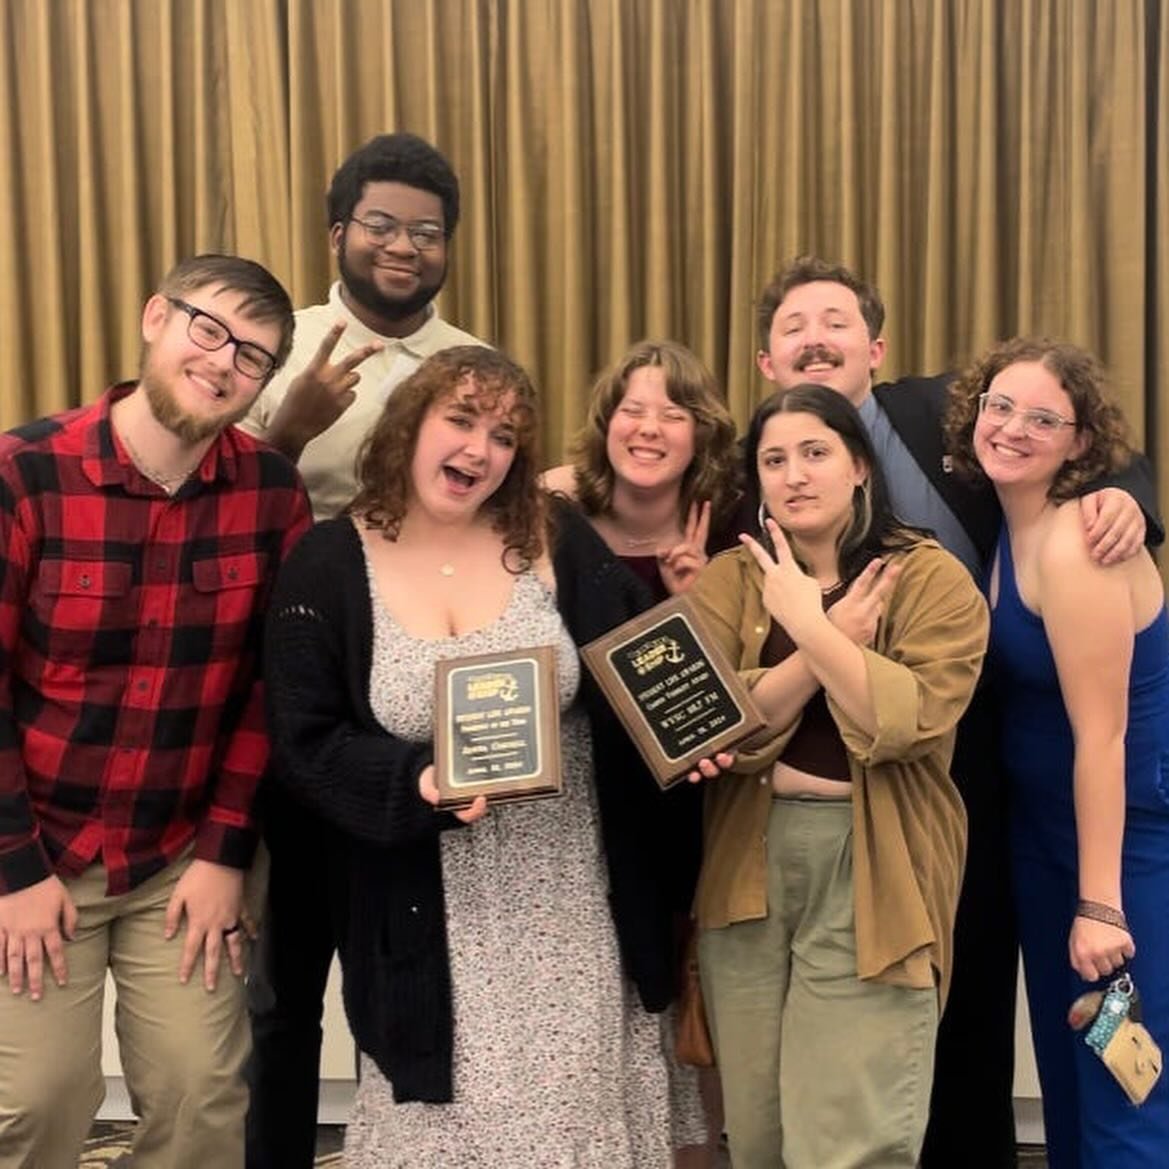 WSYC received not one, but TWO awards at last night&rsquo;s Ship Student Life awards ceremony! WSYC took home the Campus Visibility Award and our General Manager Jenna Cornell took home President of the Year! @shipucjm 
We want to thank all our new D